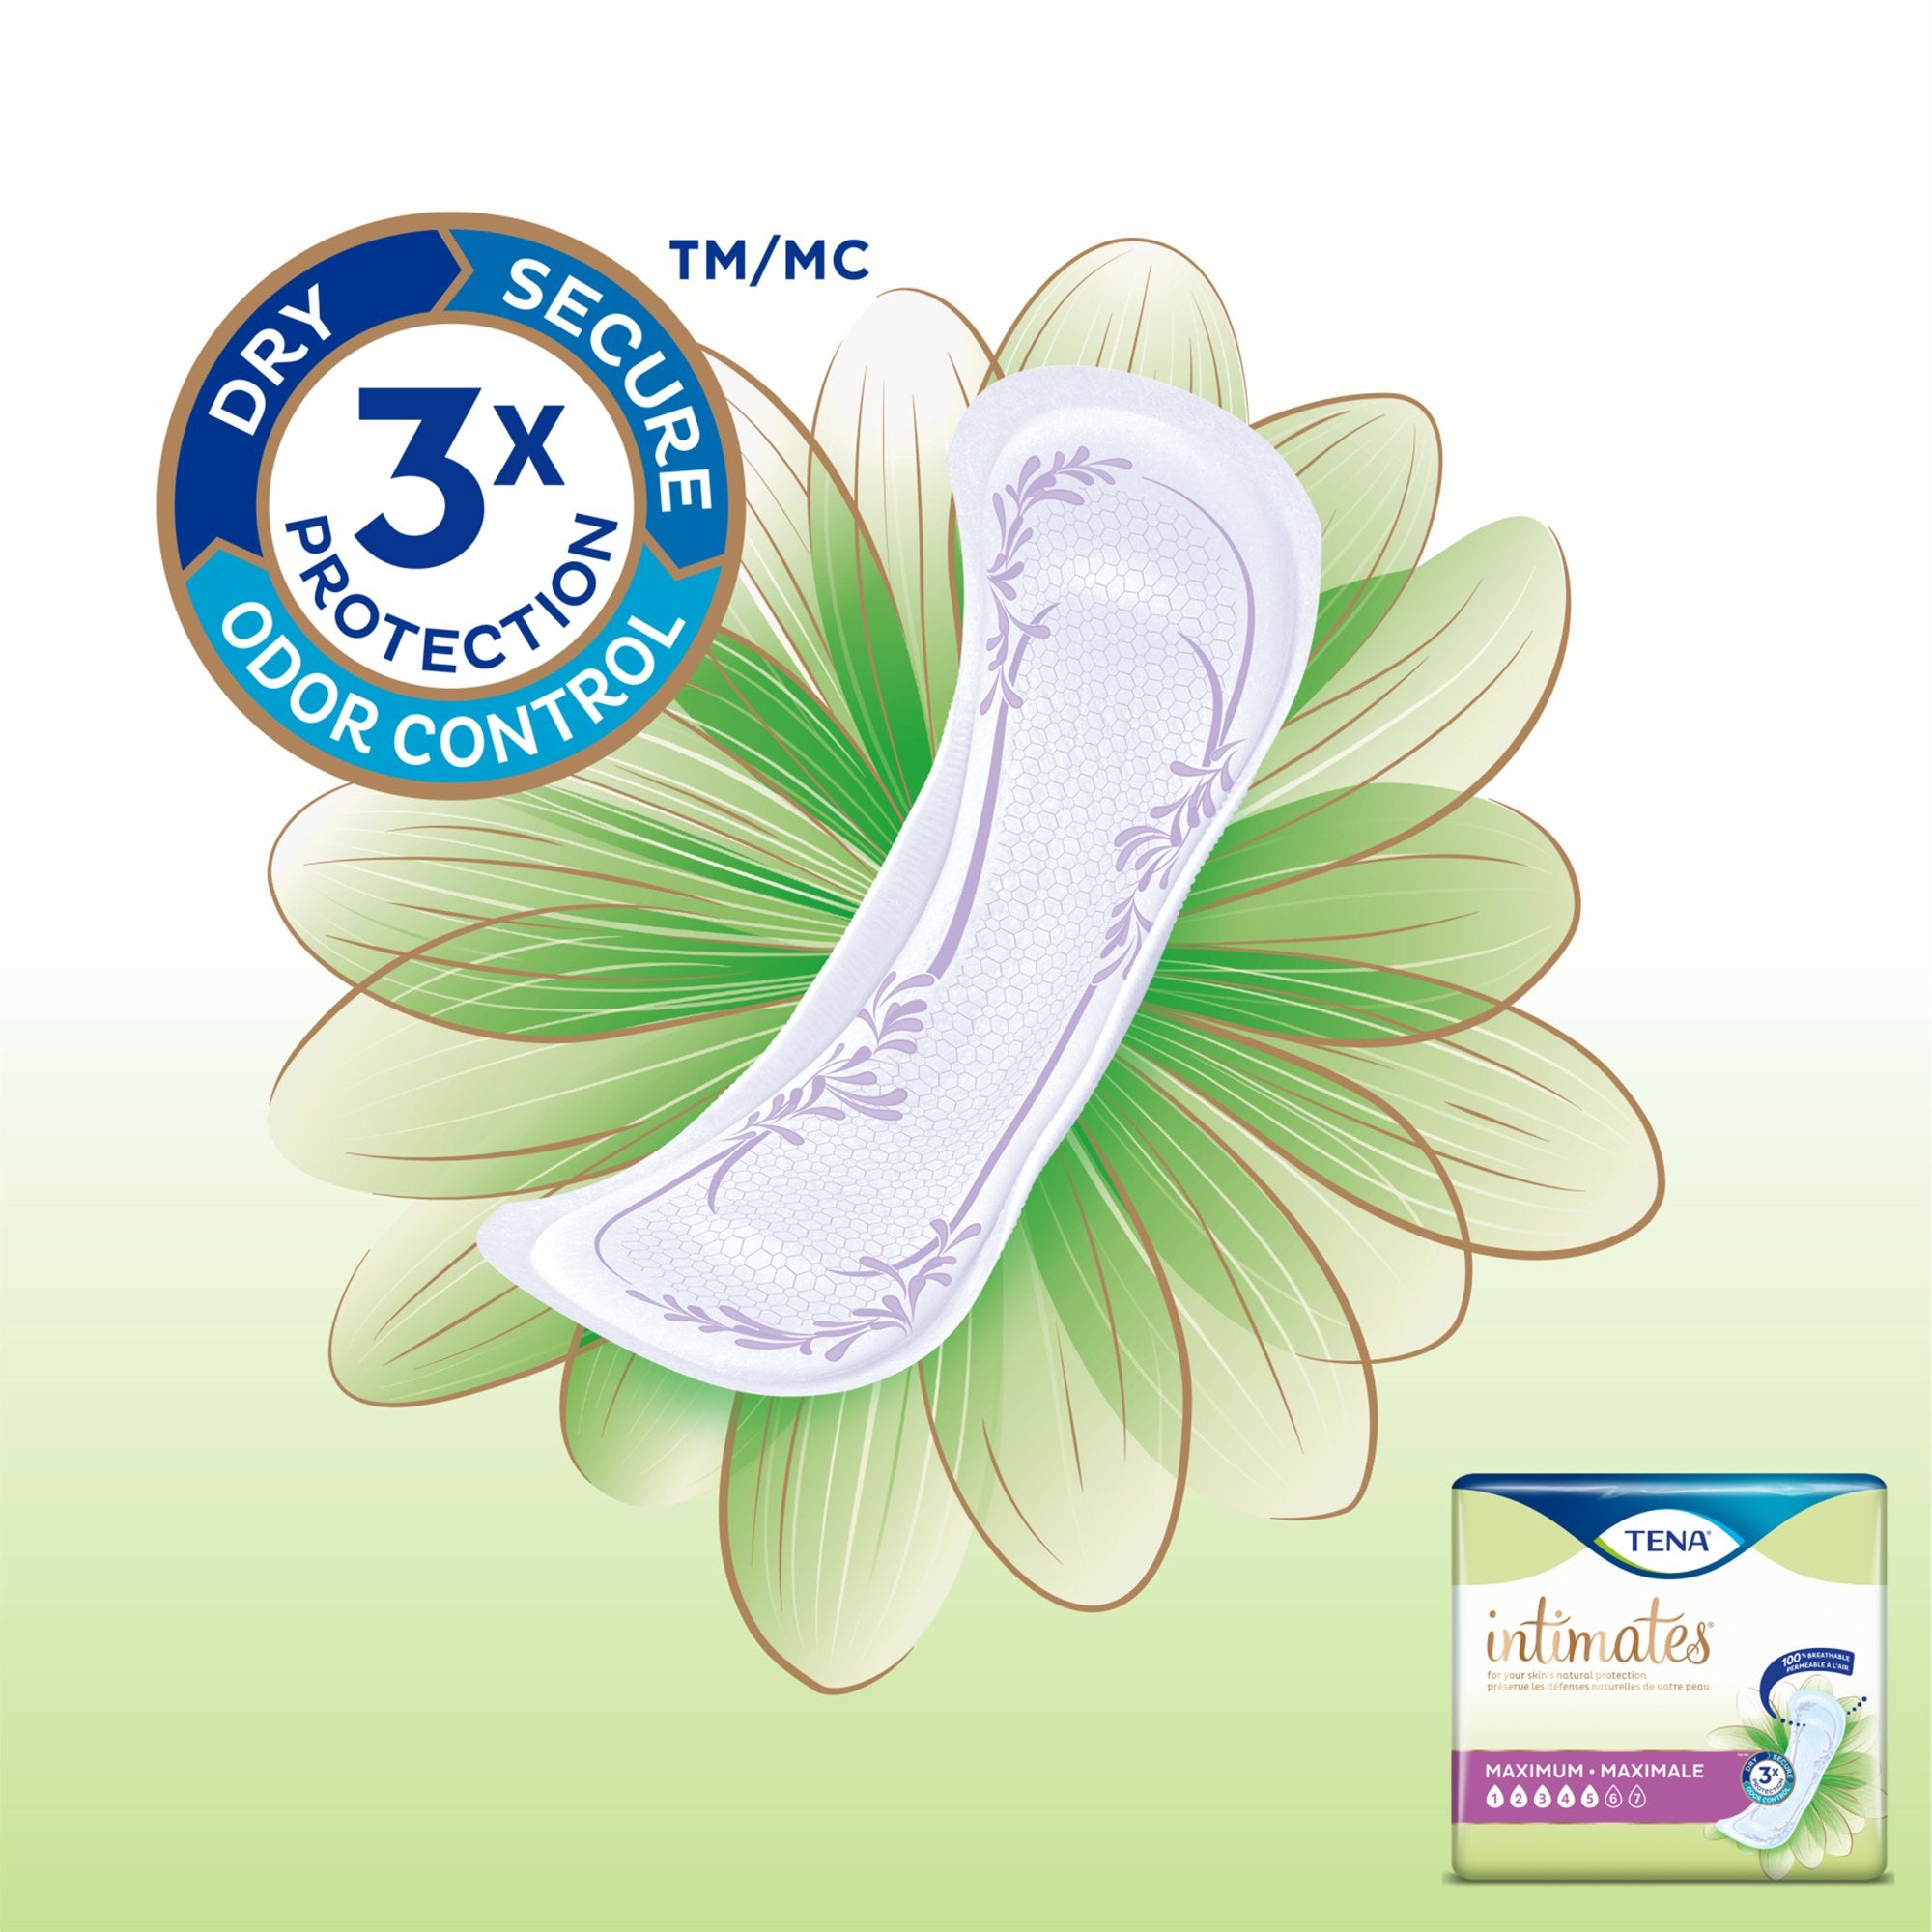 Bladder Control Pad TENA Intimates Maximum Long 13 Inch Length Heavy Absorbency Dry-Fast Core One Size Fits Most